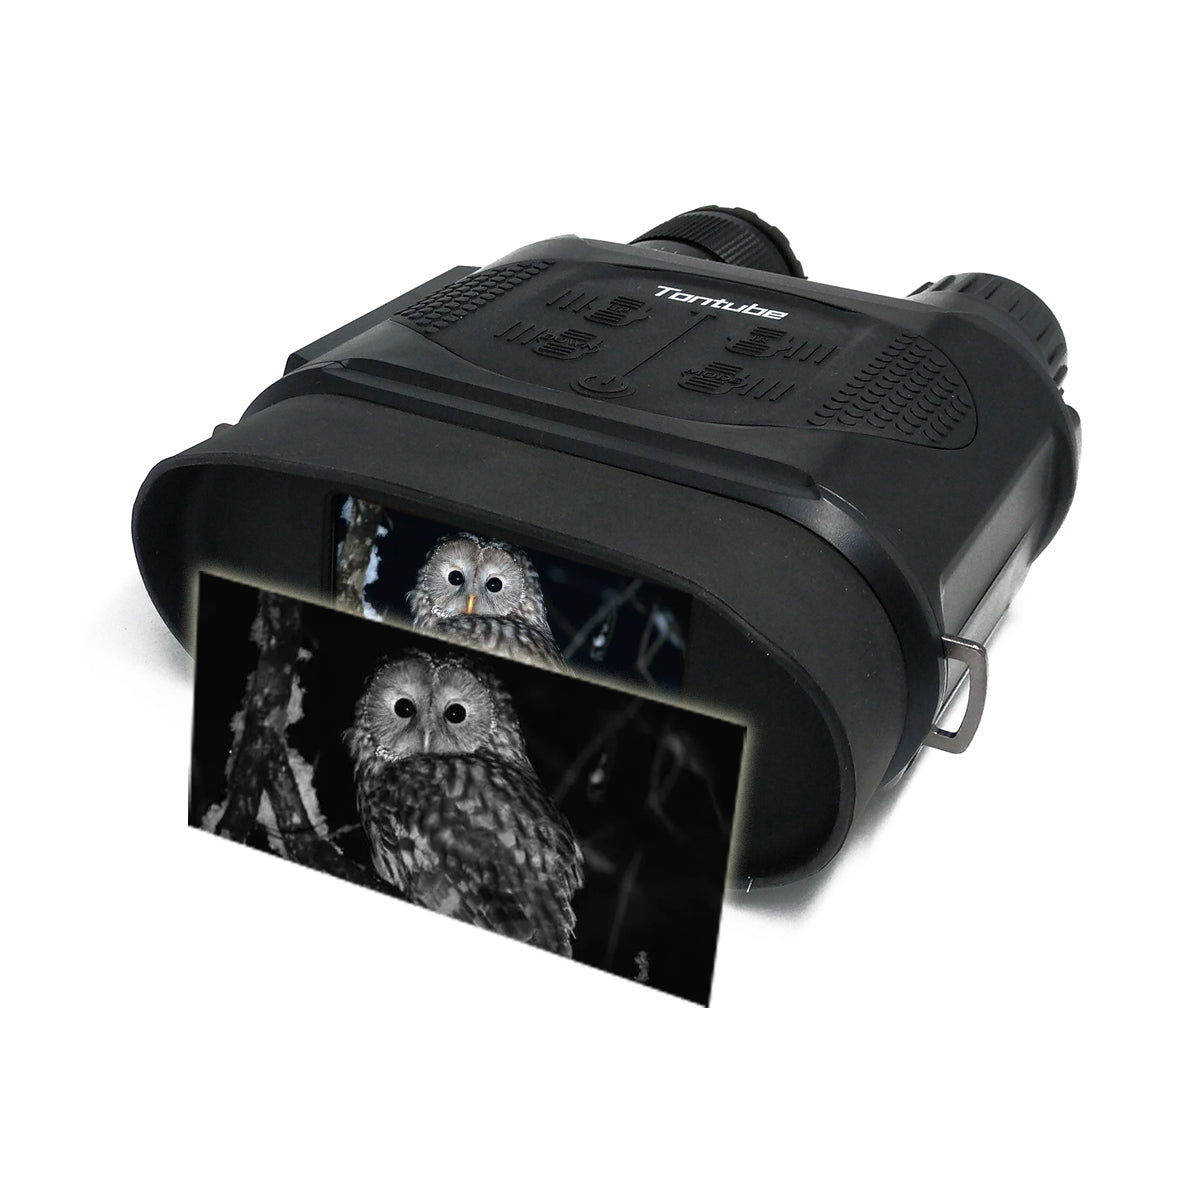 Night Vision Goggles Digital Infrared Binoculars for Hunting & Security with Picture and Video Record Function